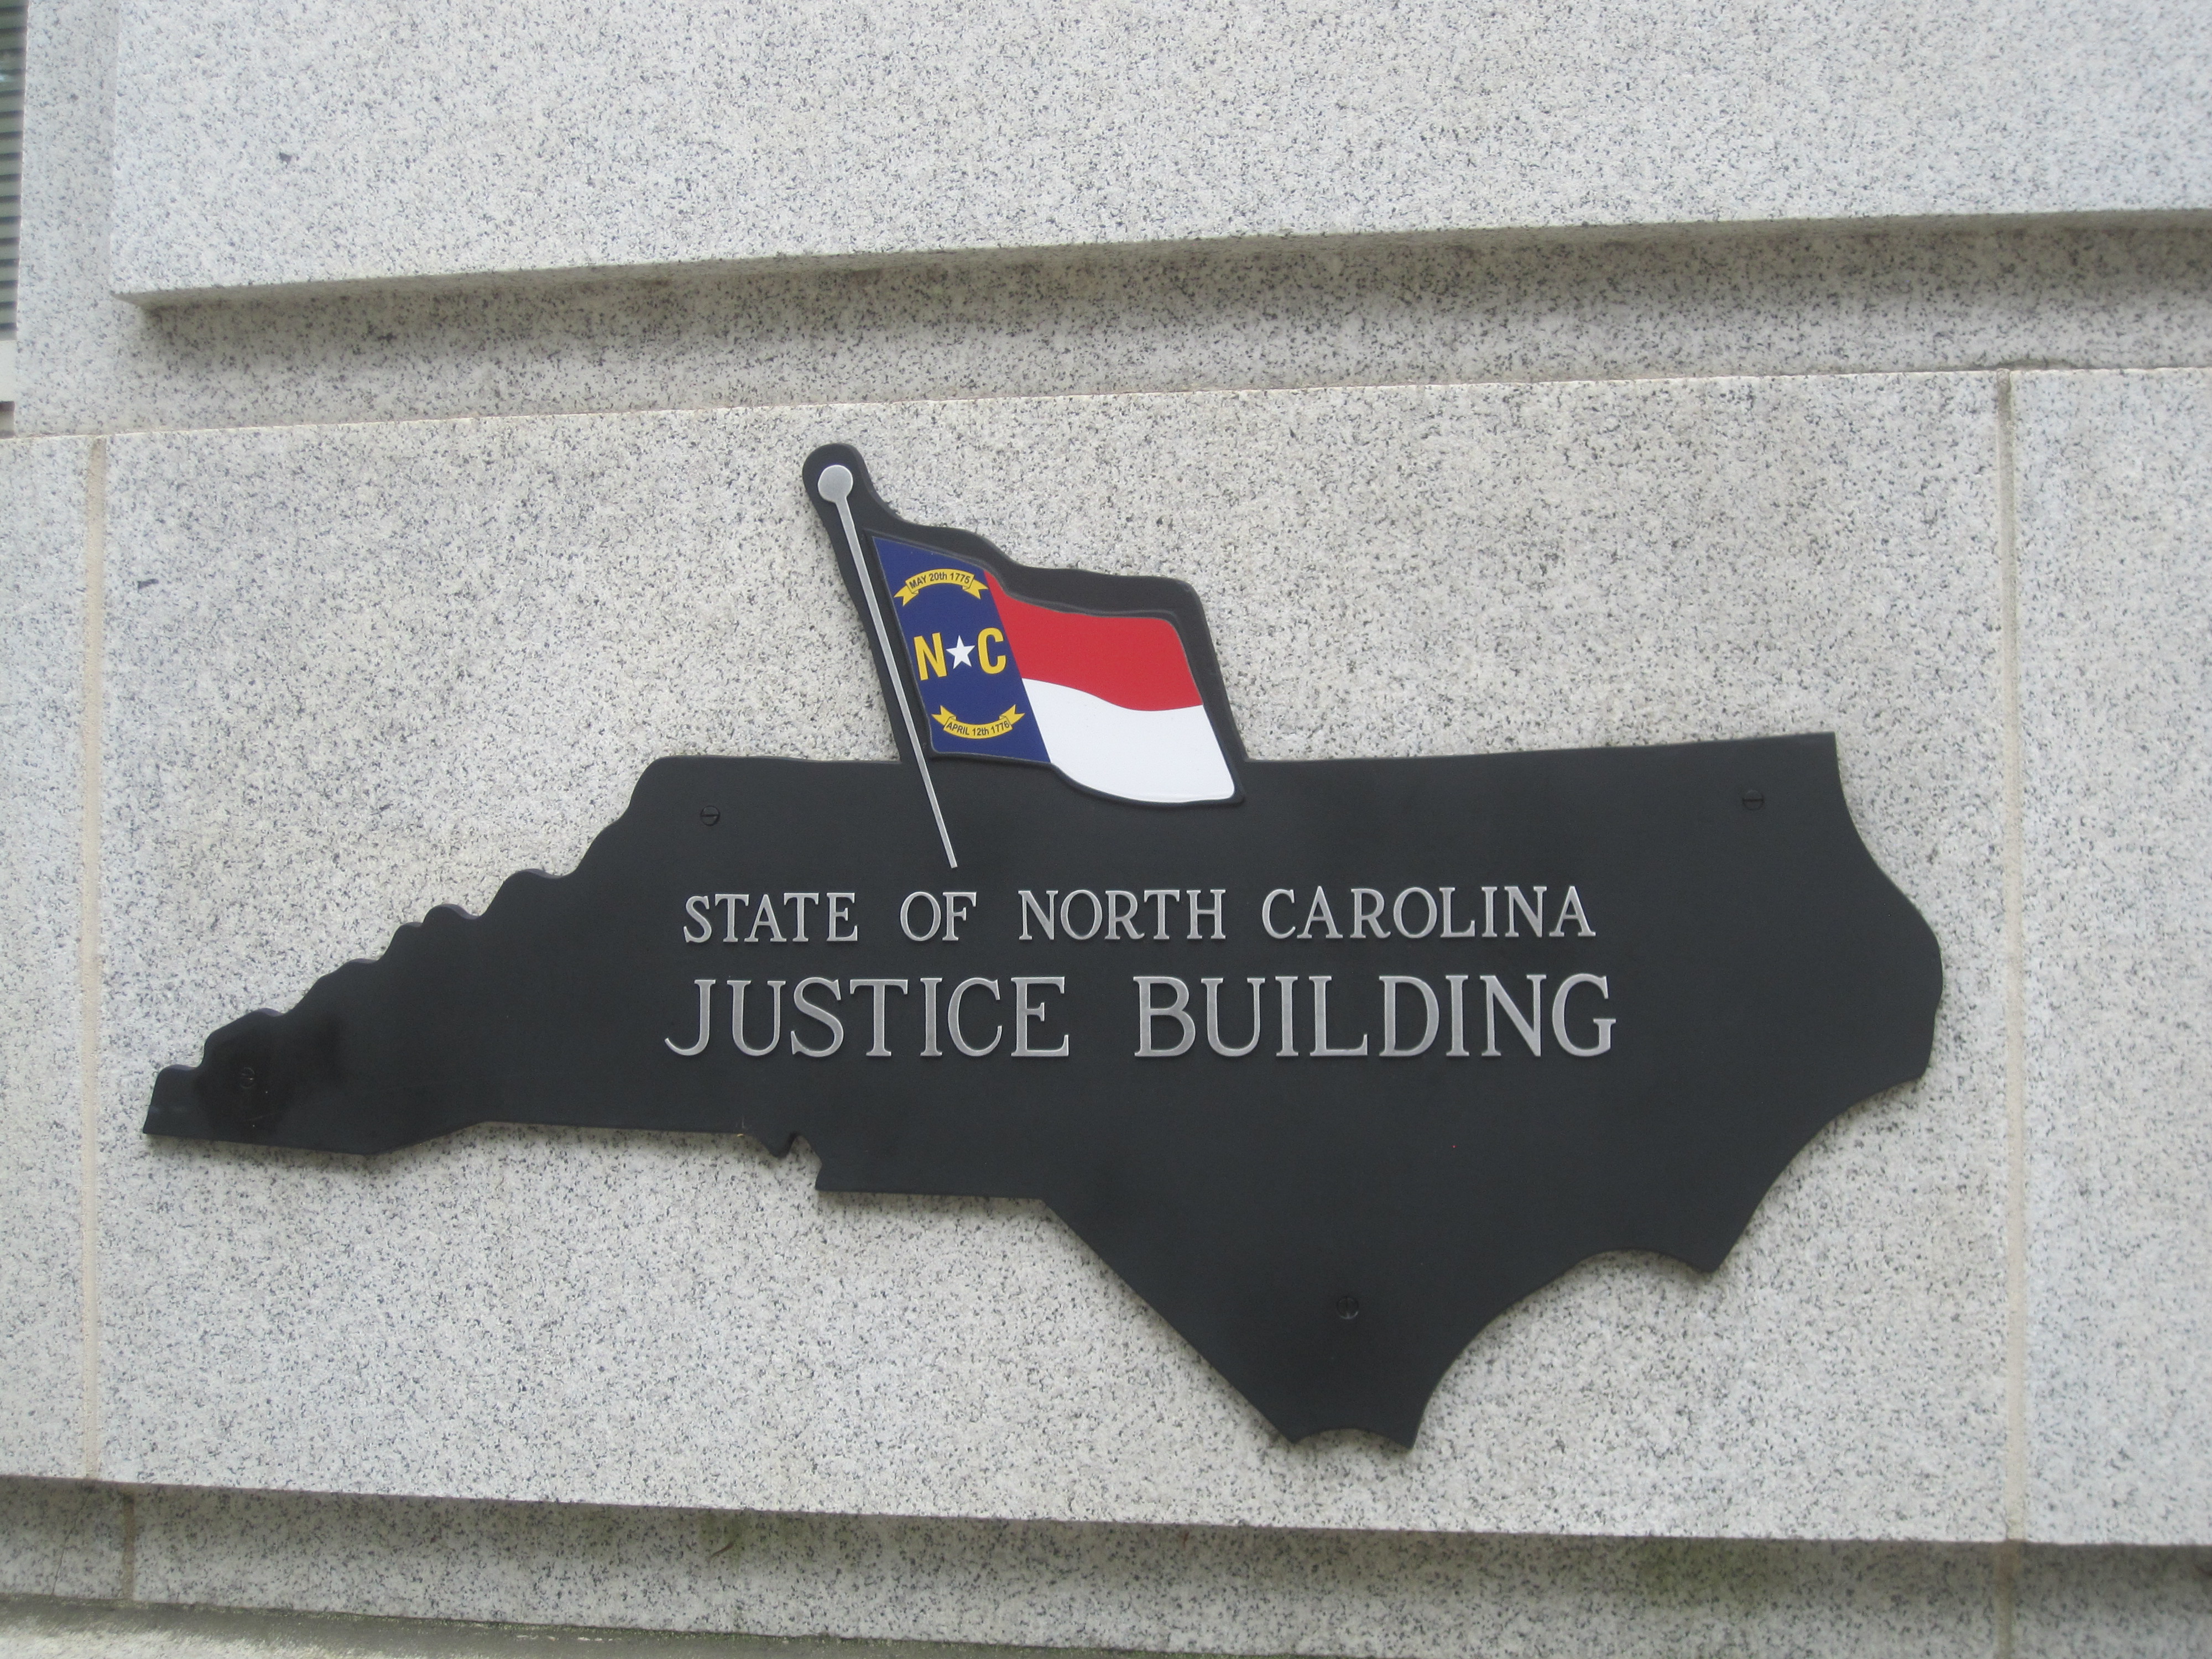 North Carolina Supreme Court holds that it had no authority to strike down redistricting maps last year